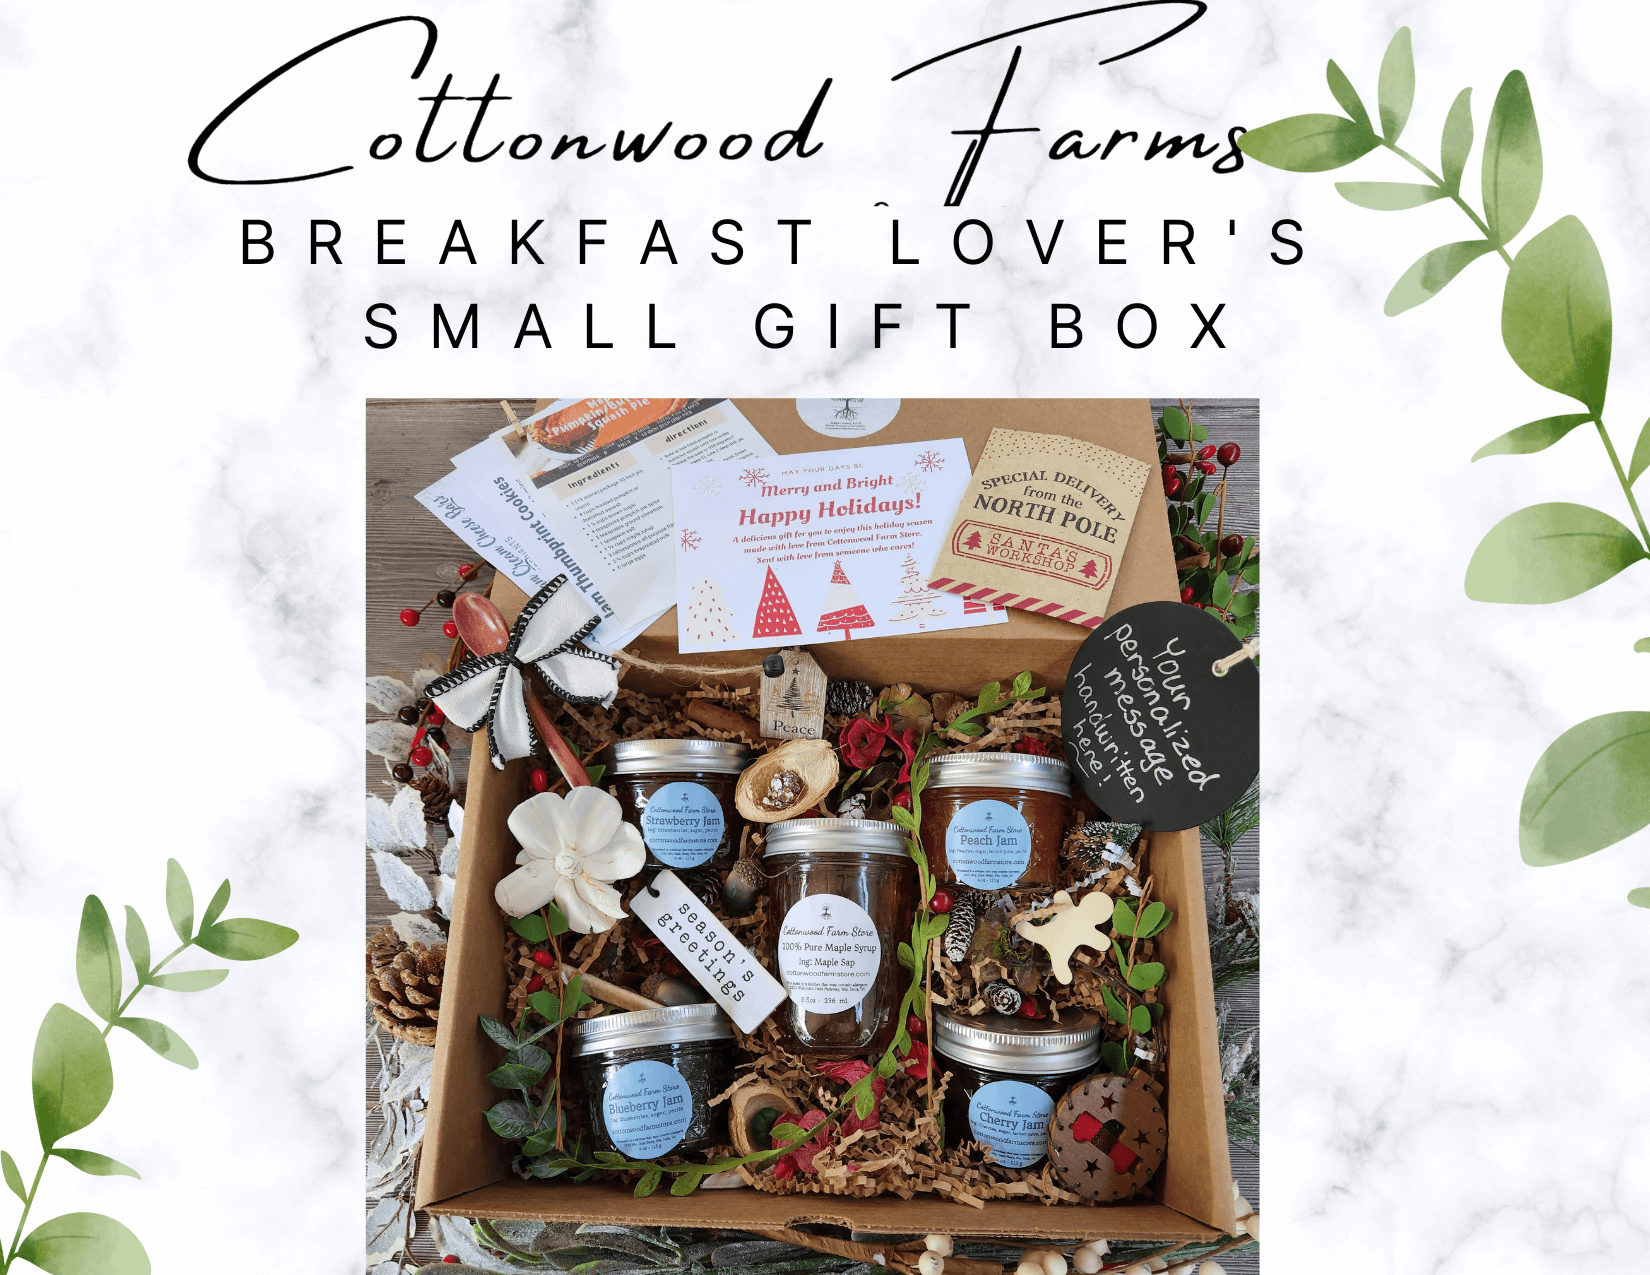 Breakfast Lovers Farm to Table Gourmet Sample Gift Box, Wisconsin Maple  Syrup, Food Gifts Natural Preserves, Locally Grown, Foodie Gift –  Cottonwood Farm Store, Farm to Table Goods & Custom Made Art